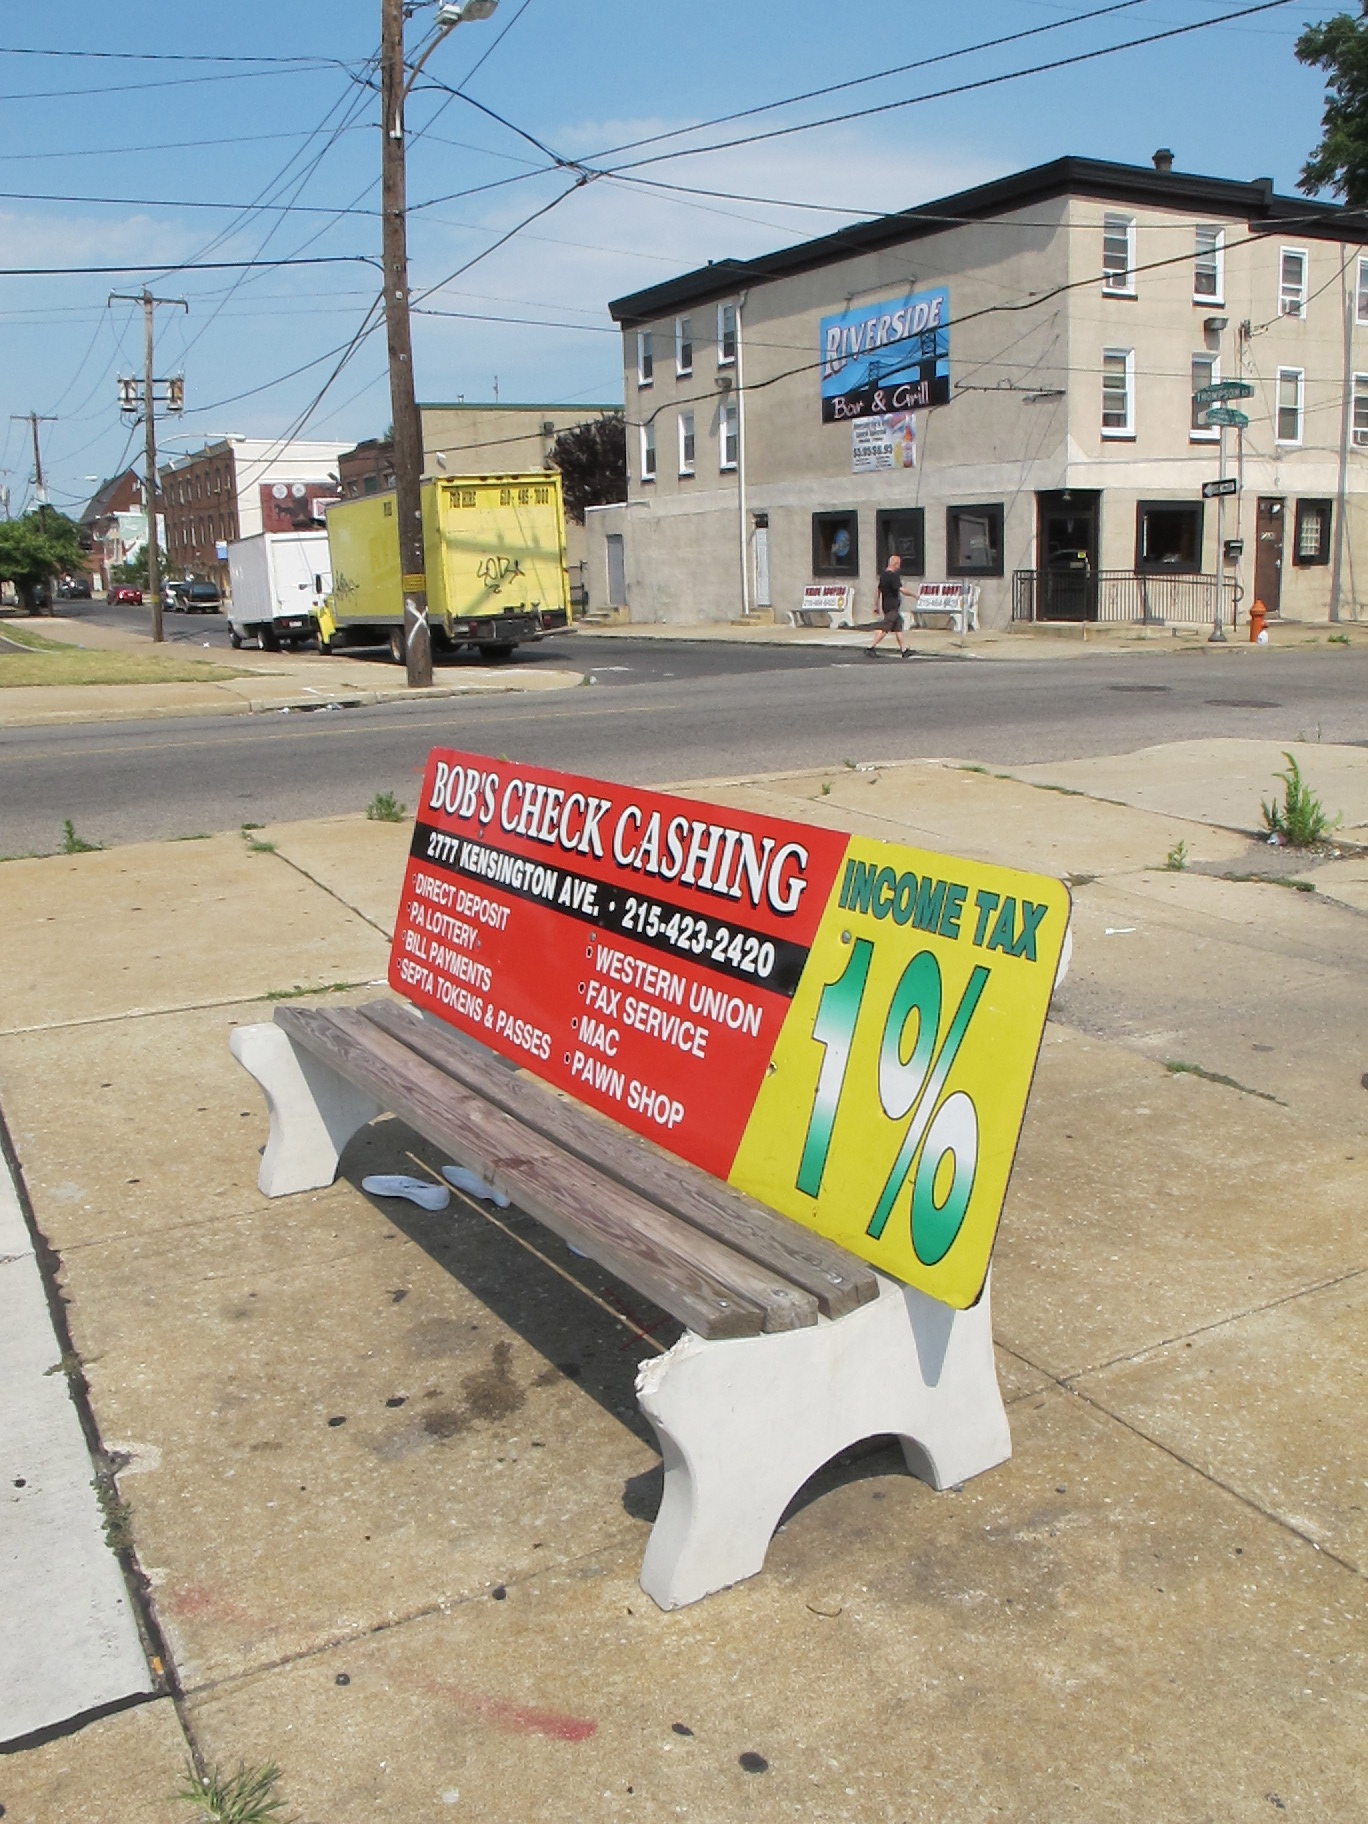 Bob's Check Cashing at Aramingo Ave. and East Cumberland, June 2012 (removed)